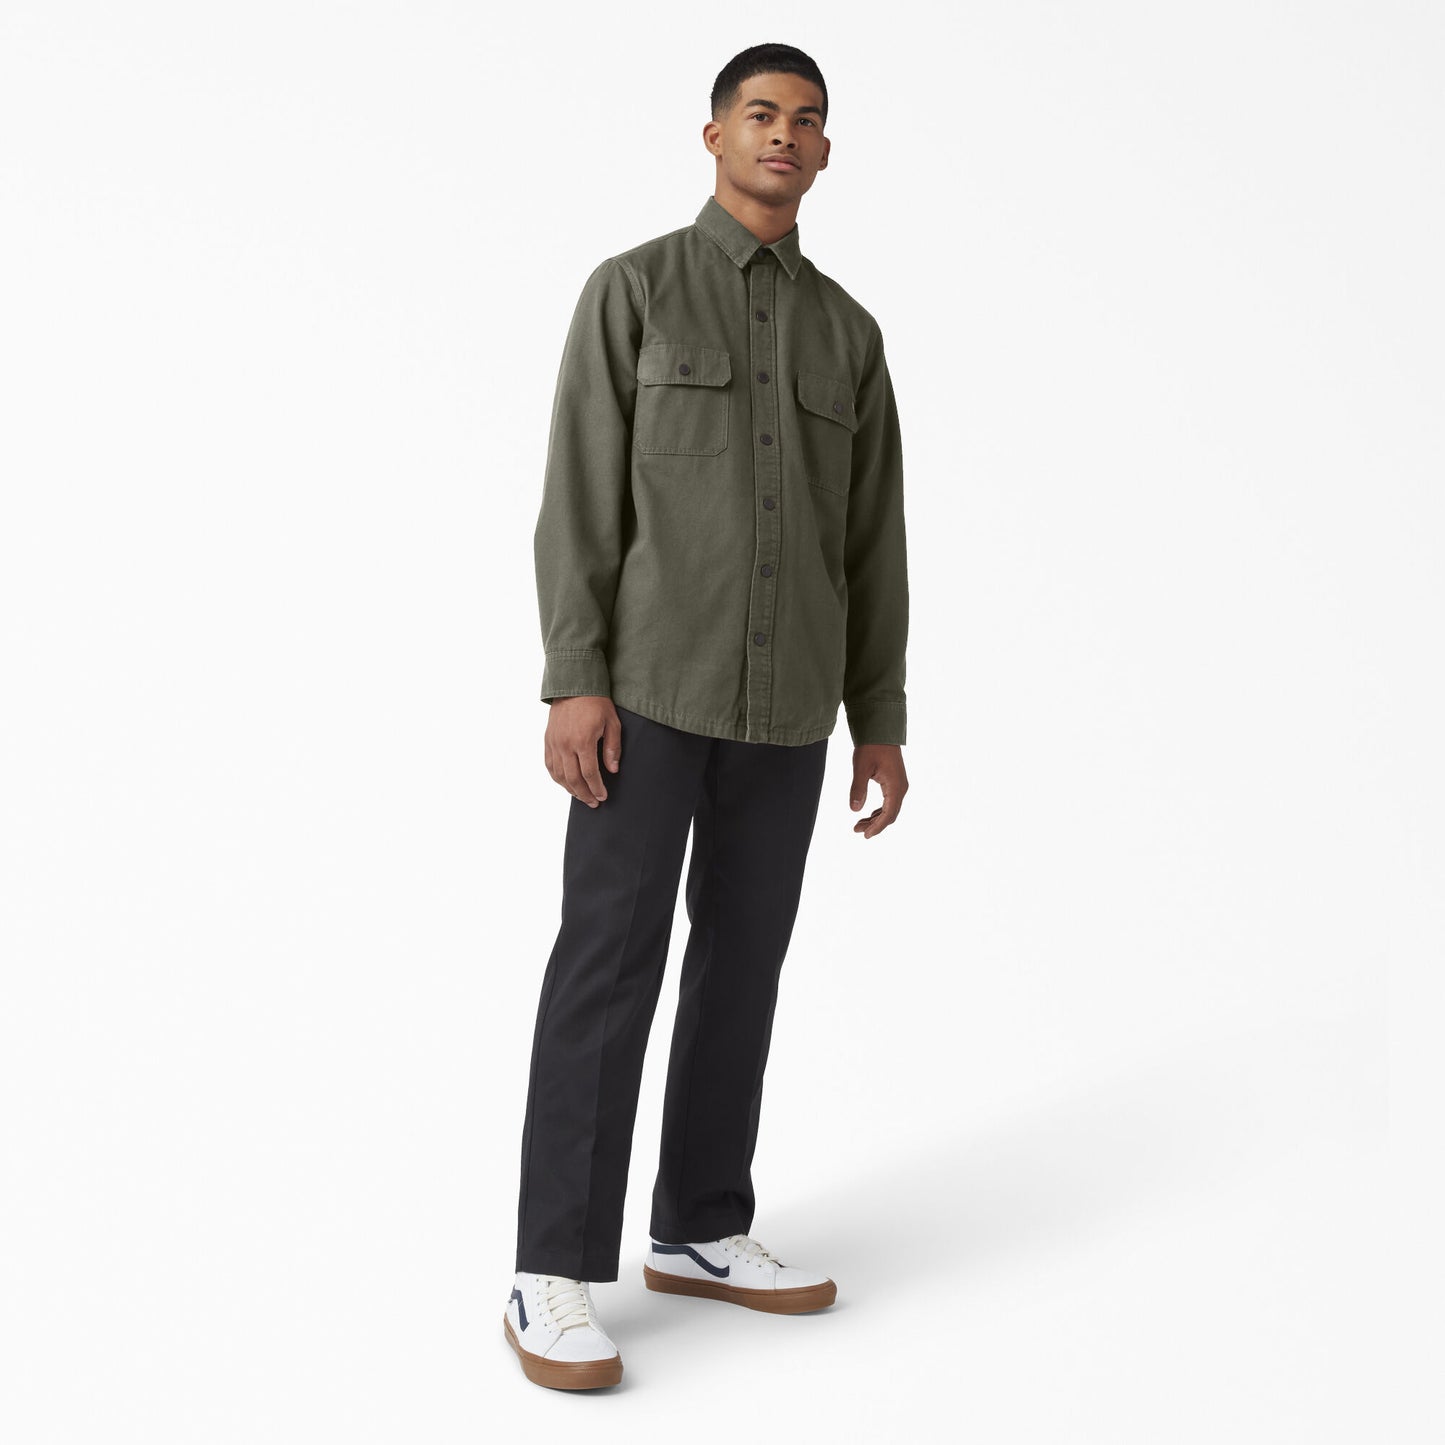 Dickies Duck Flannel Lined Shirt